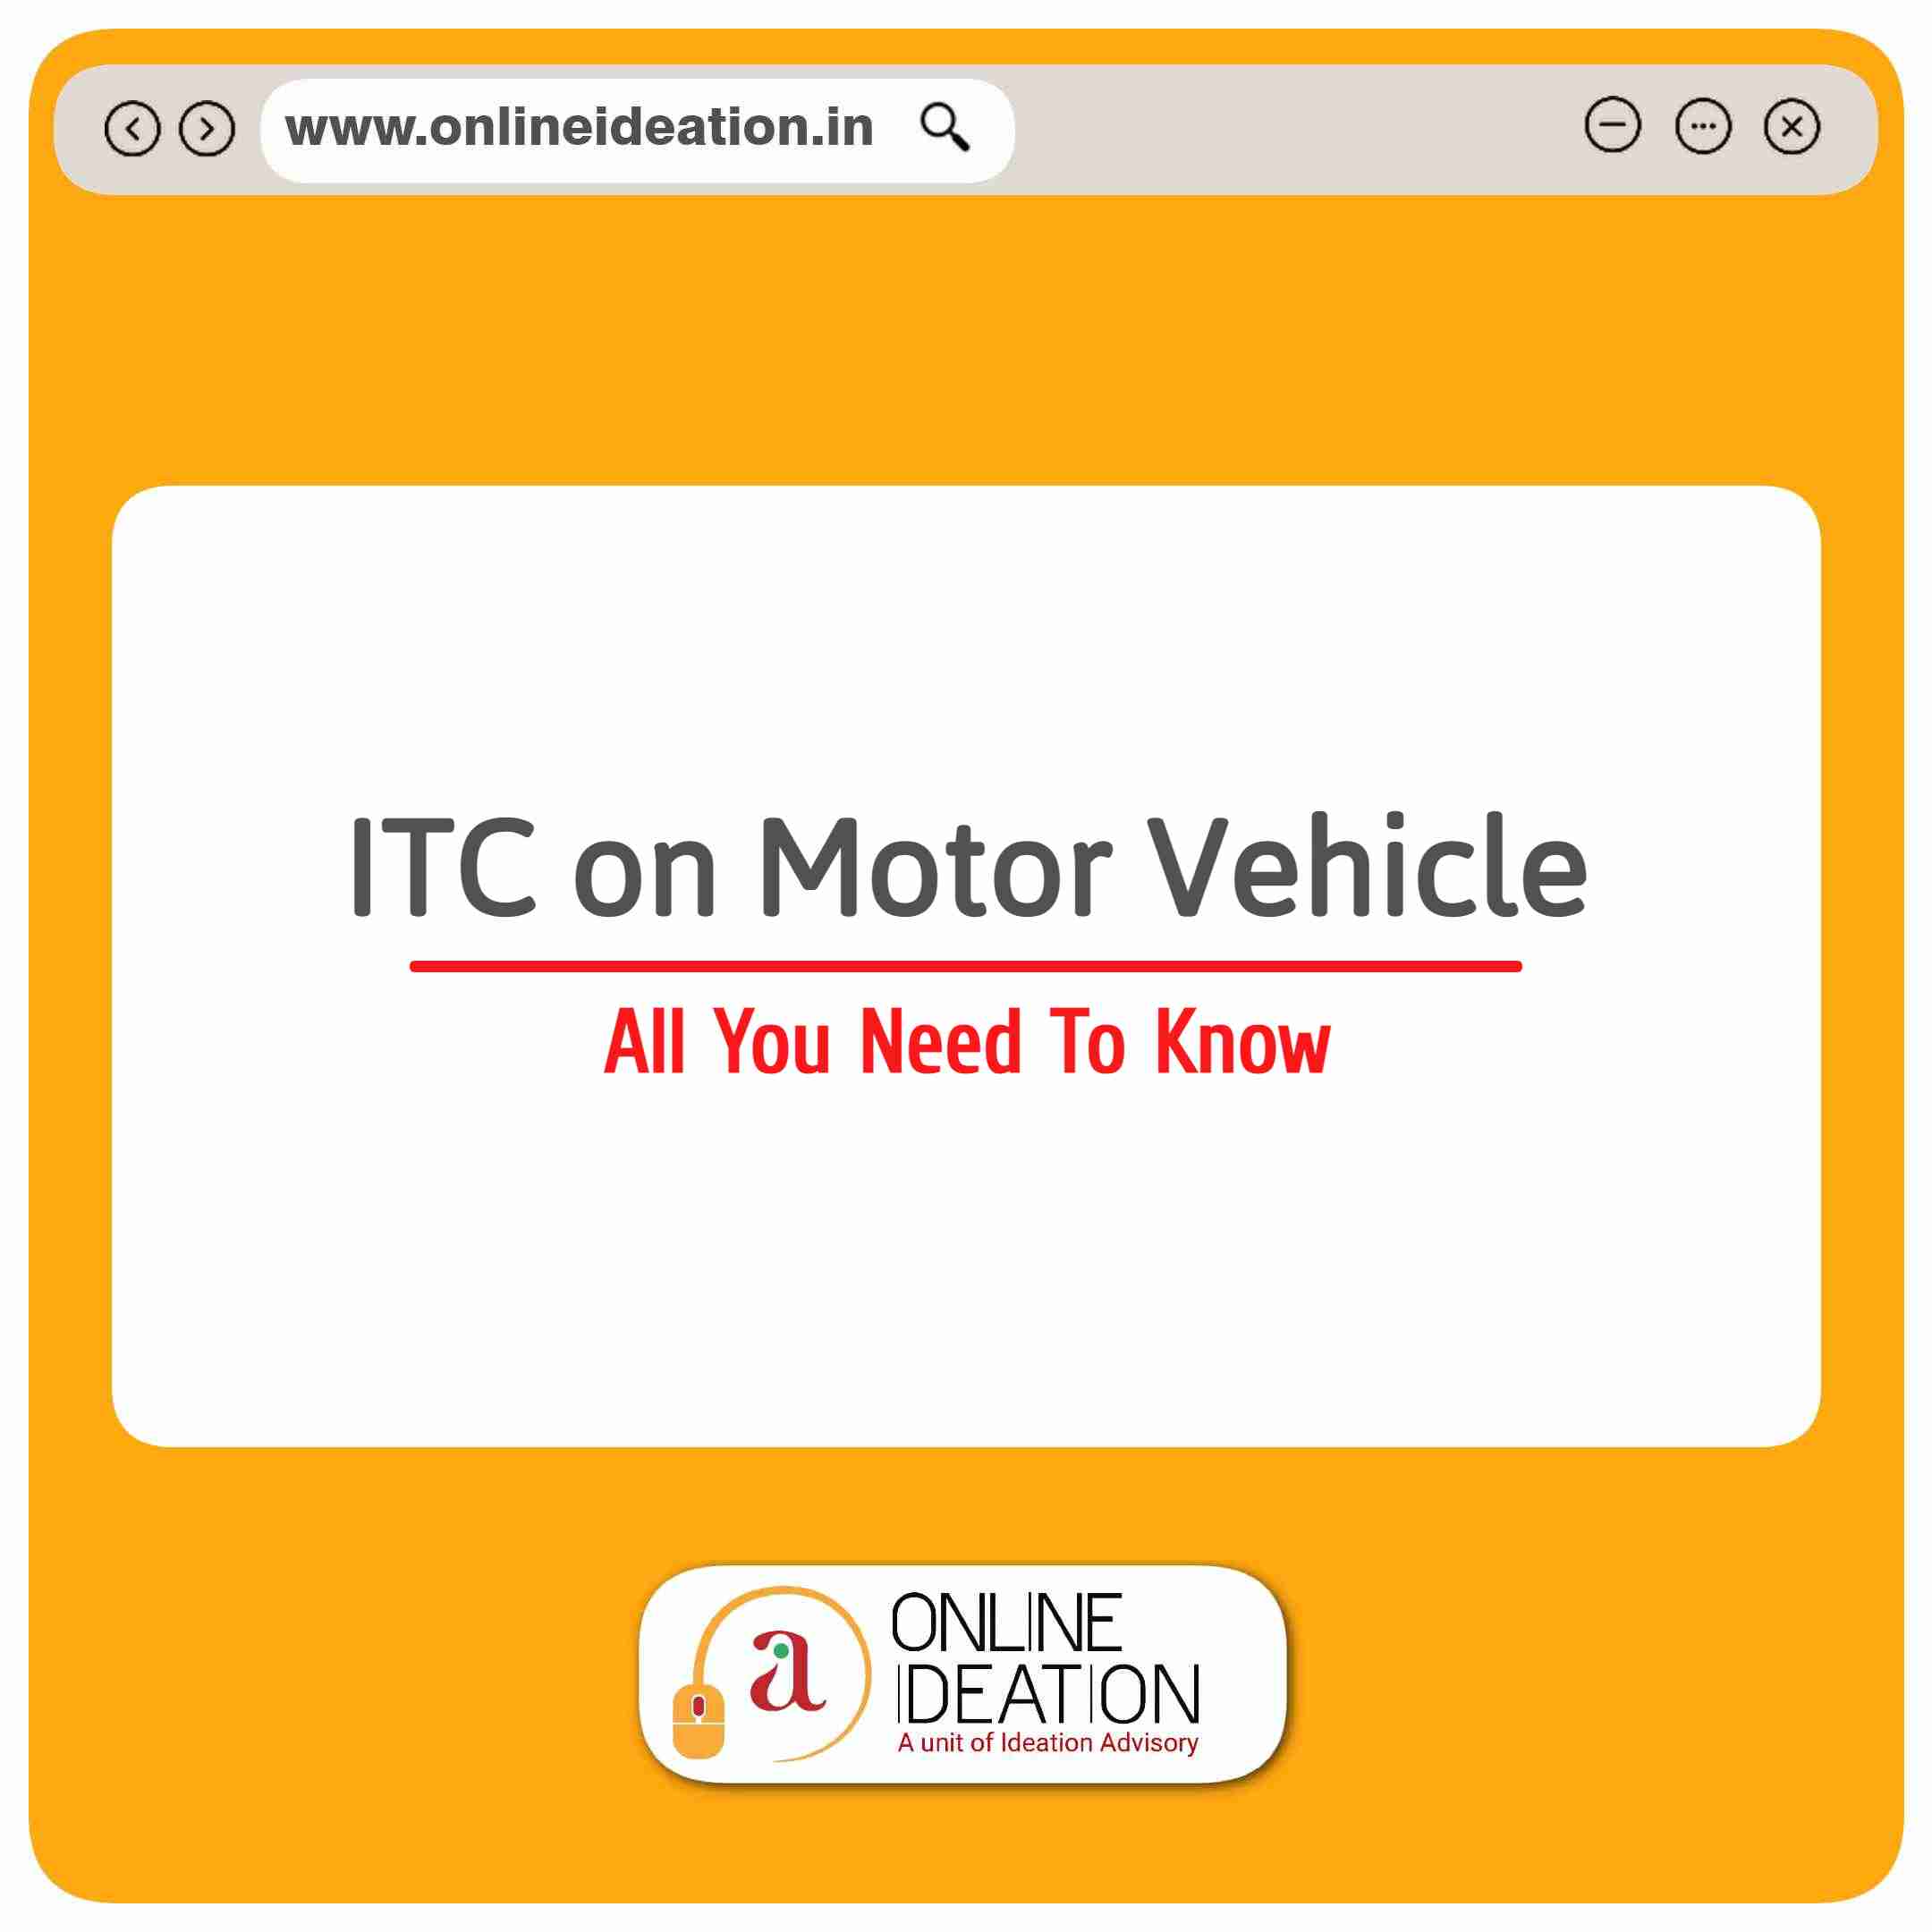 ITC on Motor Vehicle All You Need To Know Onlineideation